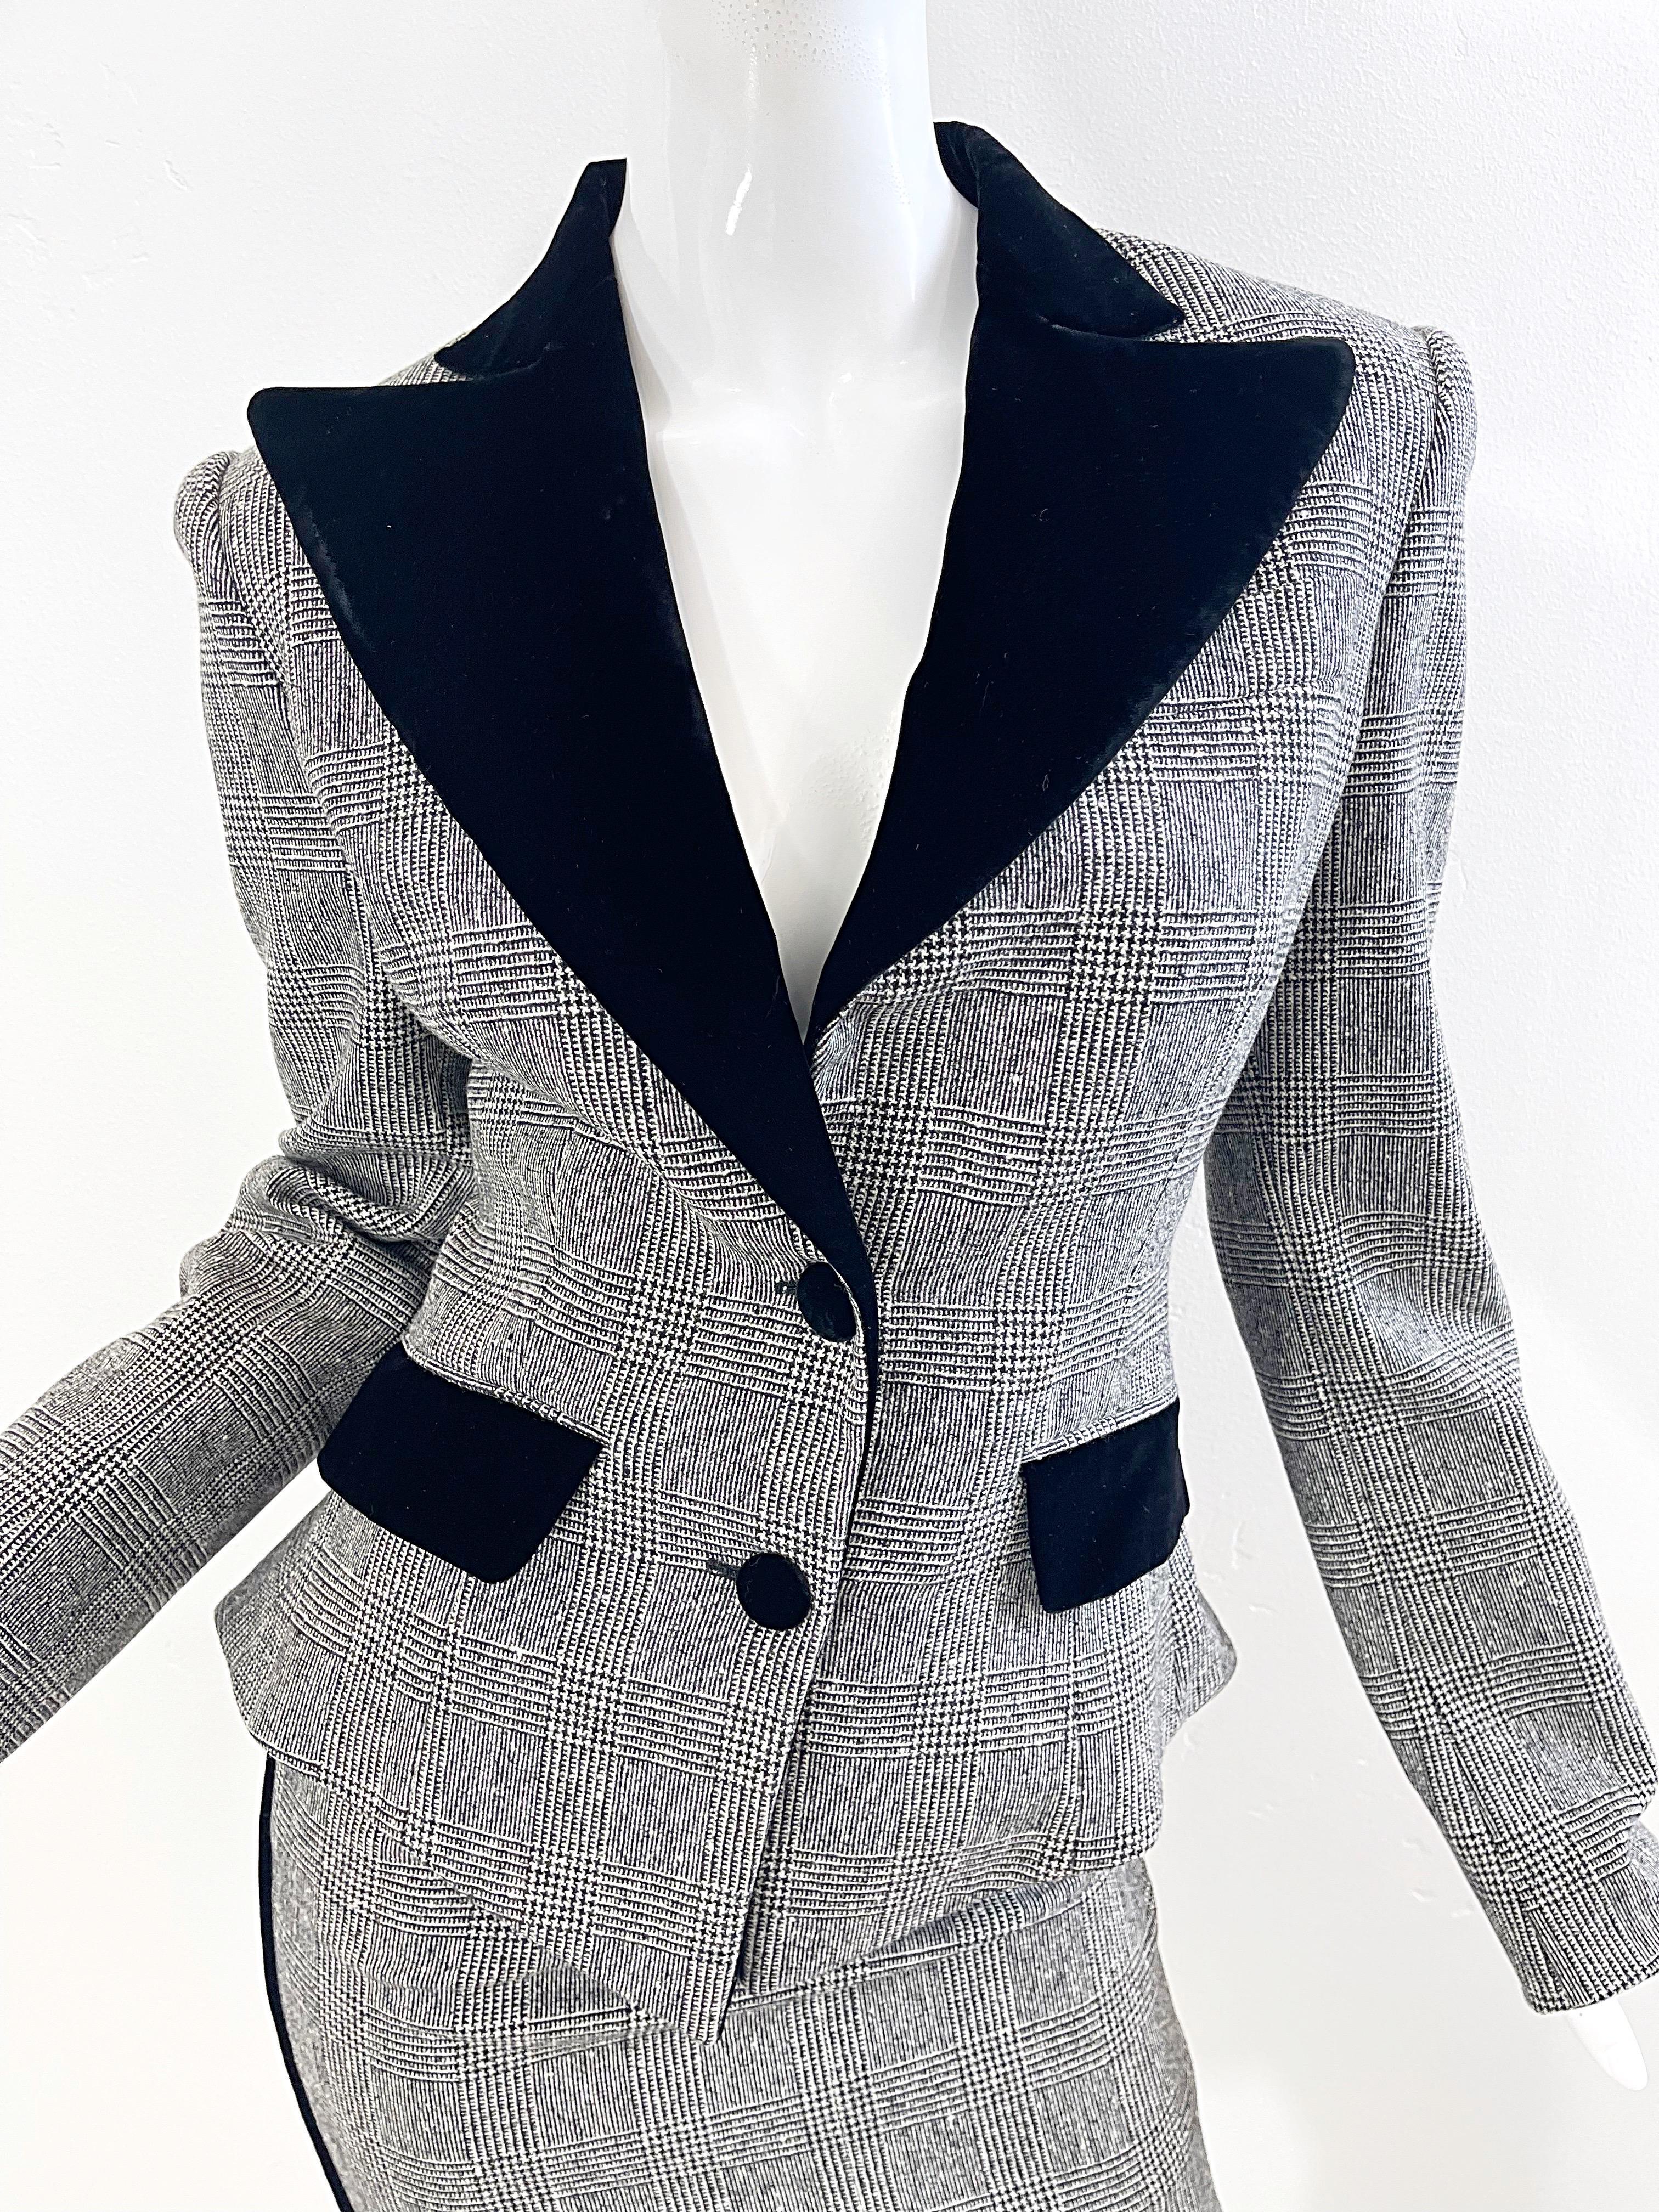 New Roberto Cavalli 2000s Size 42 / 8 Black and White Plaid Skirt Suit Y2K In Excellent Condition For Sale In San Diego, CA